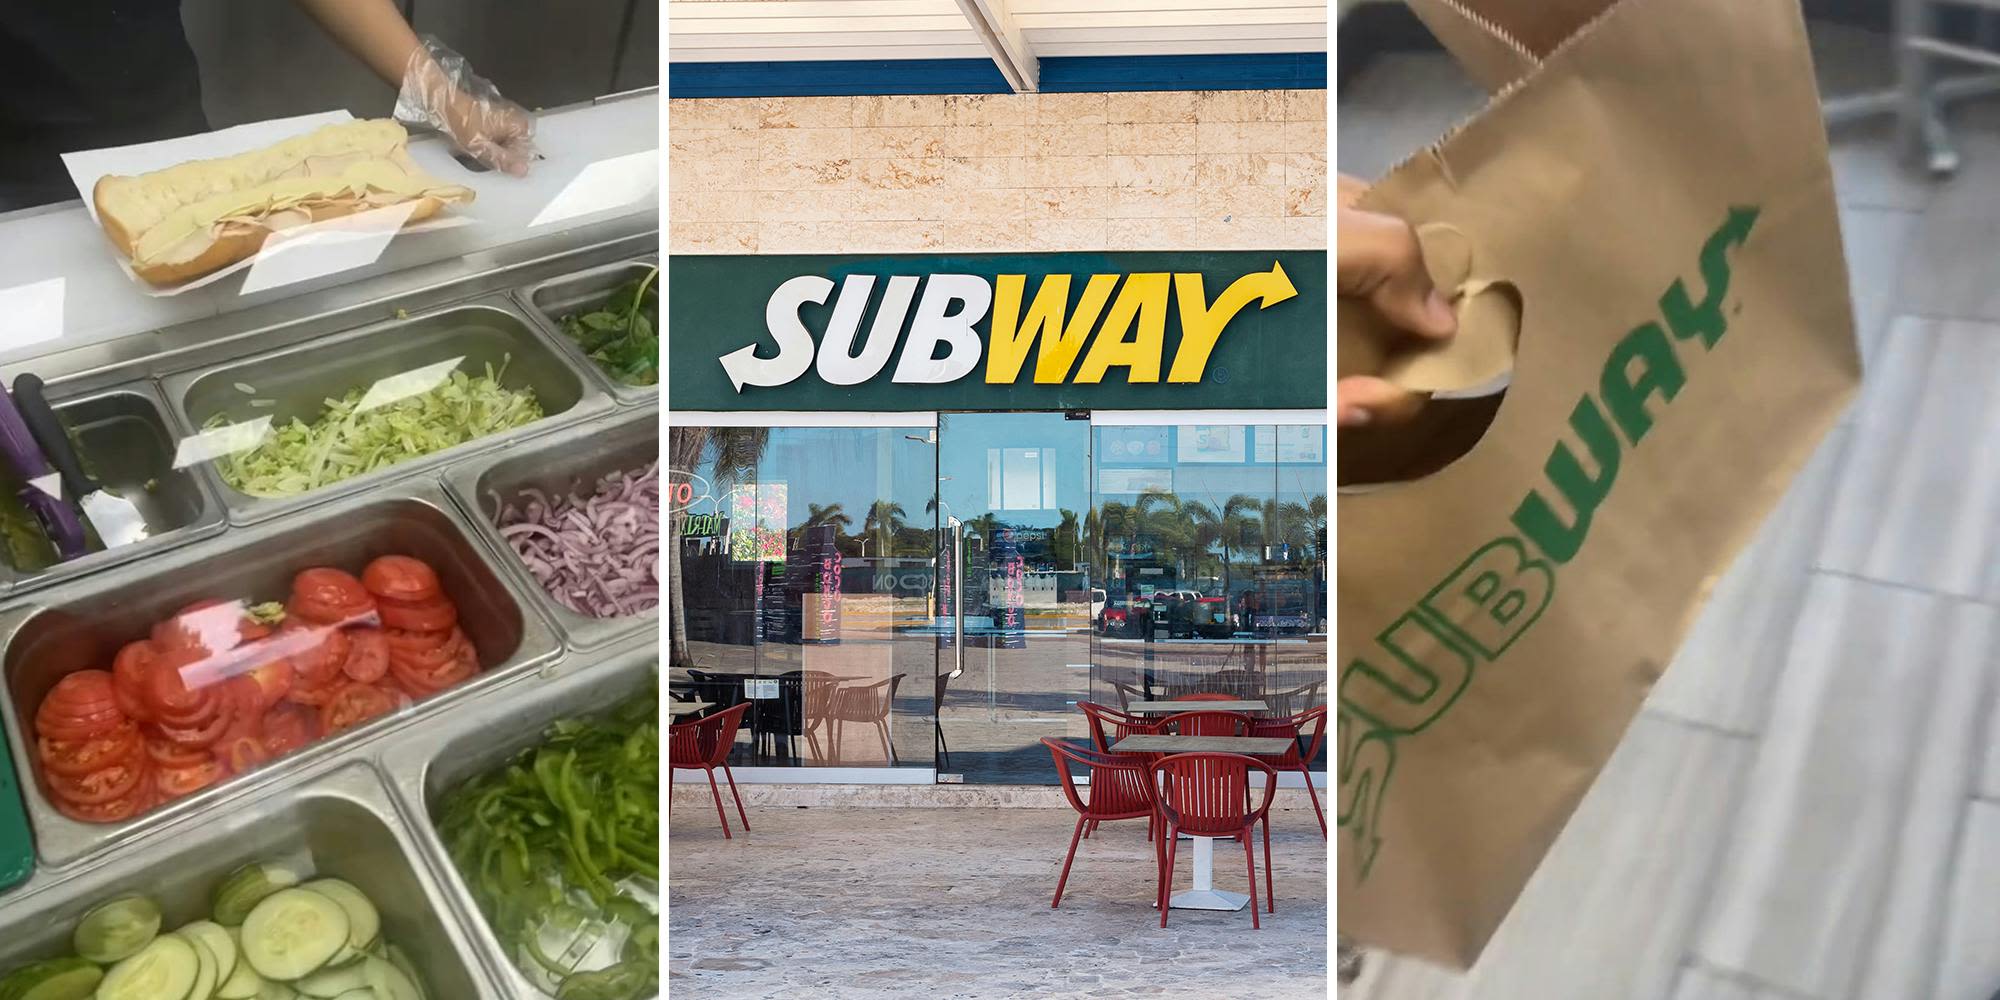 'Why y'all hiding how much meat I'm getting?': Subway customer slams new 'privacy' covers, says she can't see sandwich being made